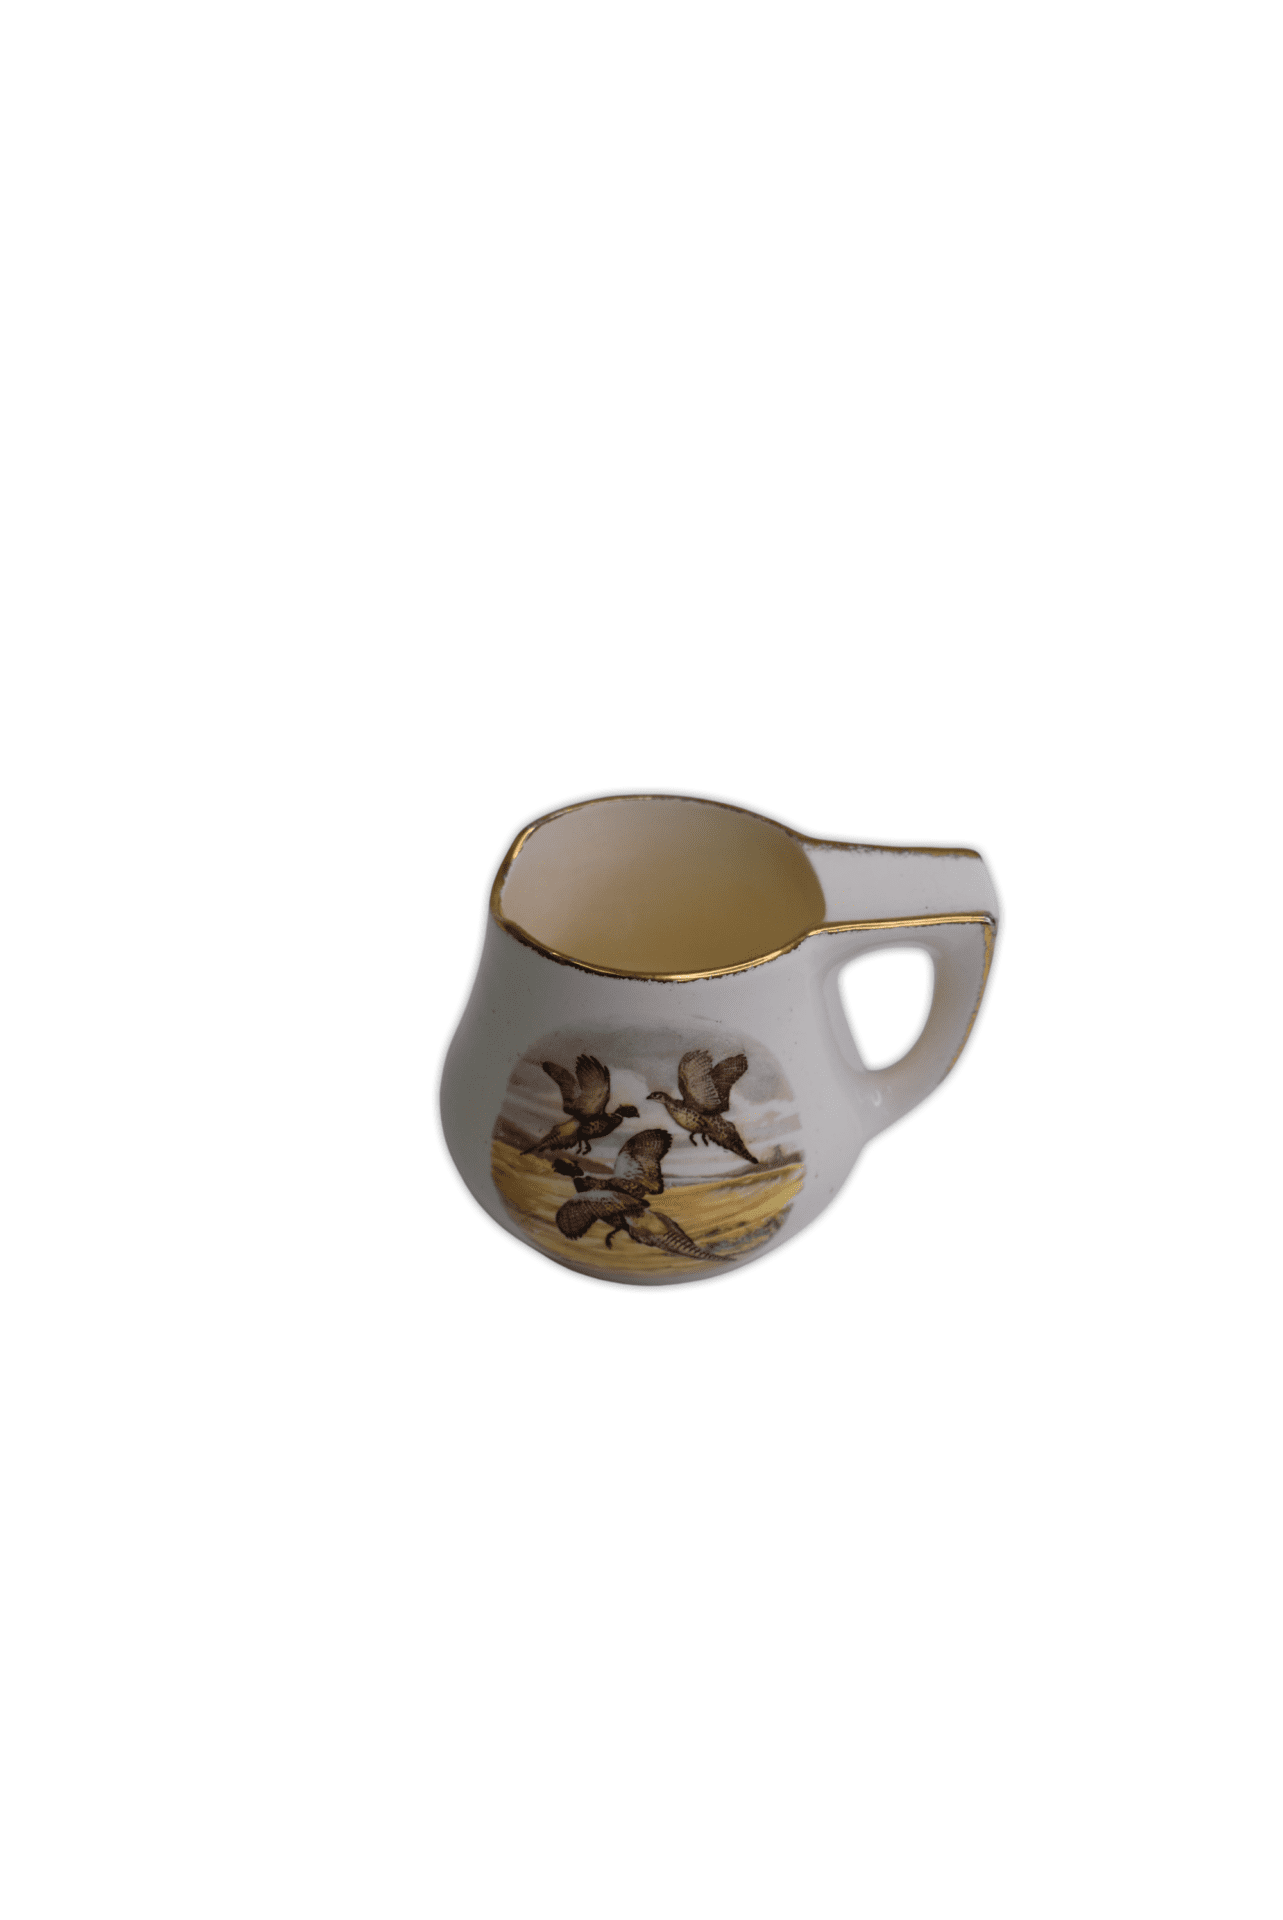 Classic shaving mug to hold your shaving brush featuring a gold trim and pheasant's print on the side.